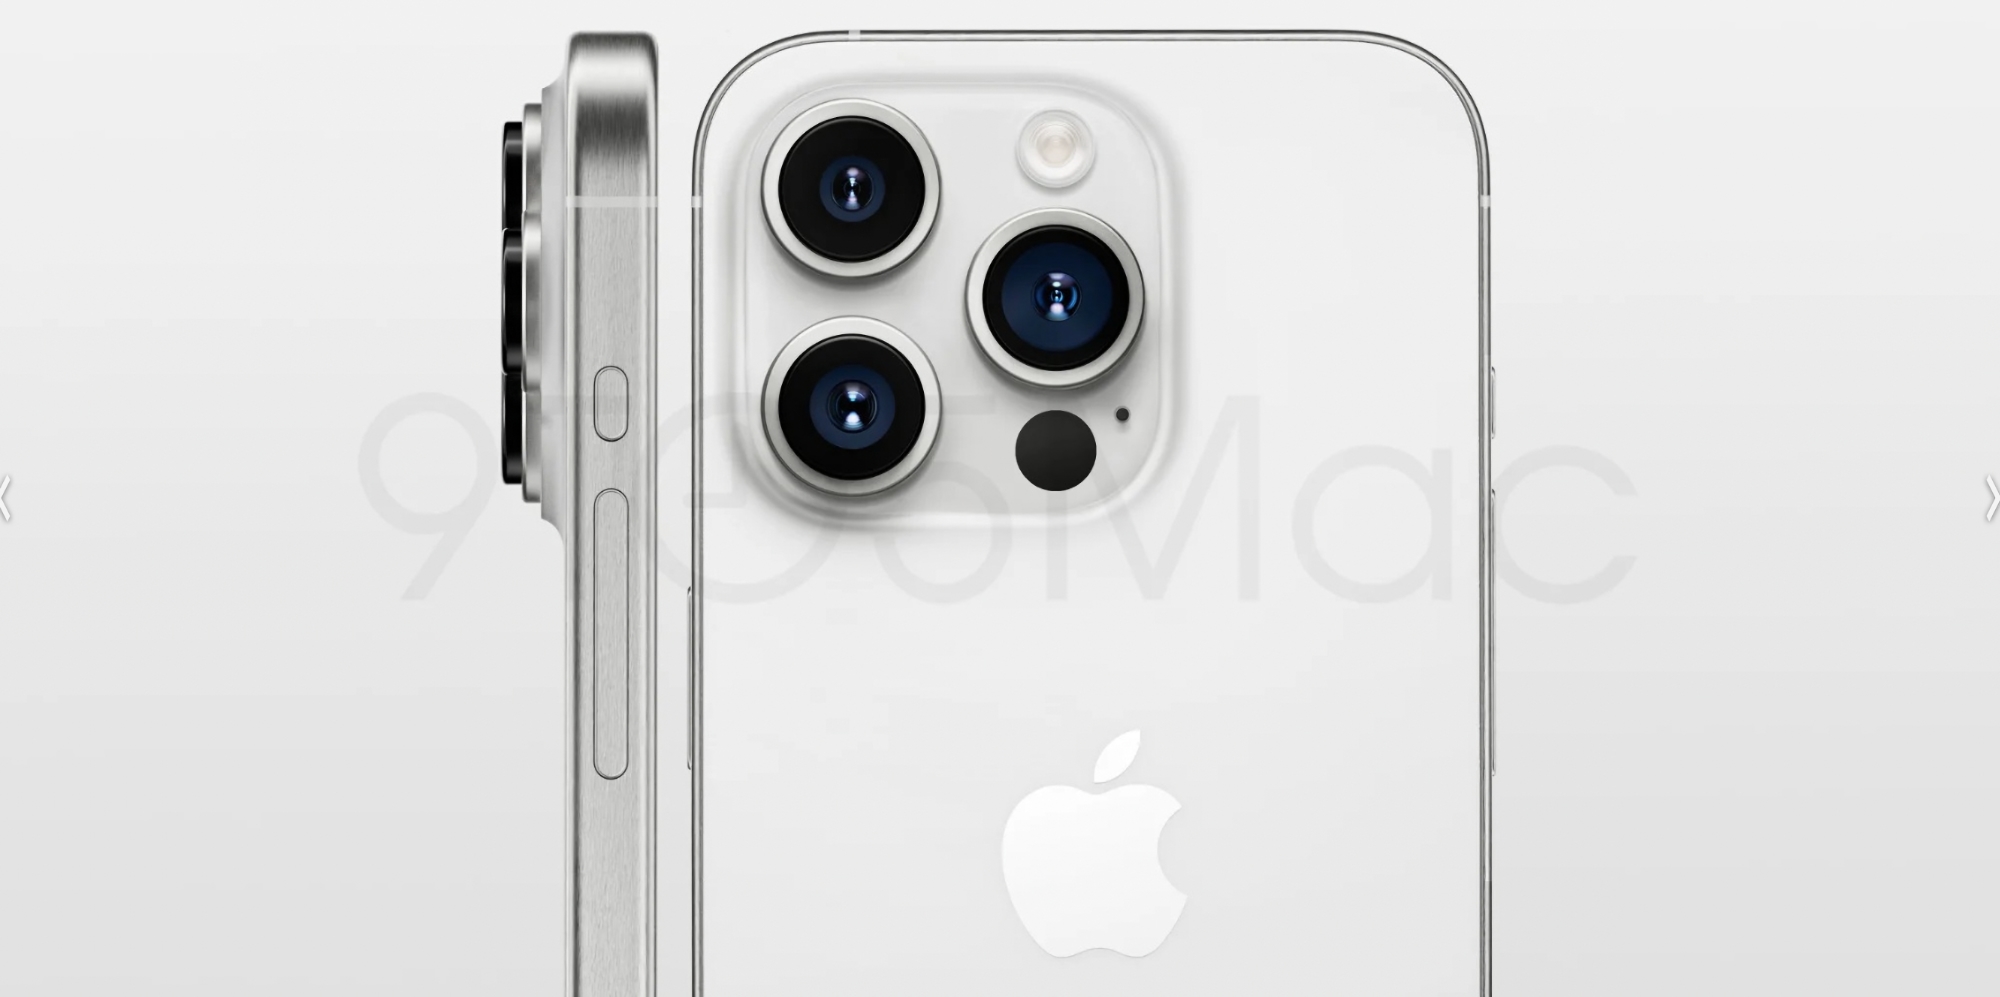 Rumour: Apple has decided not to fit the iPhone 15 Pro and iPhone 15 Pro Max with Taptic Engine touch pads instead of physical buttons